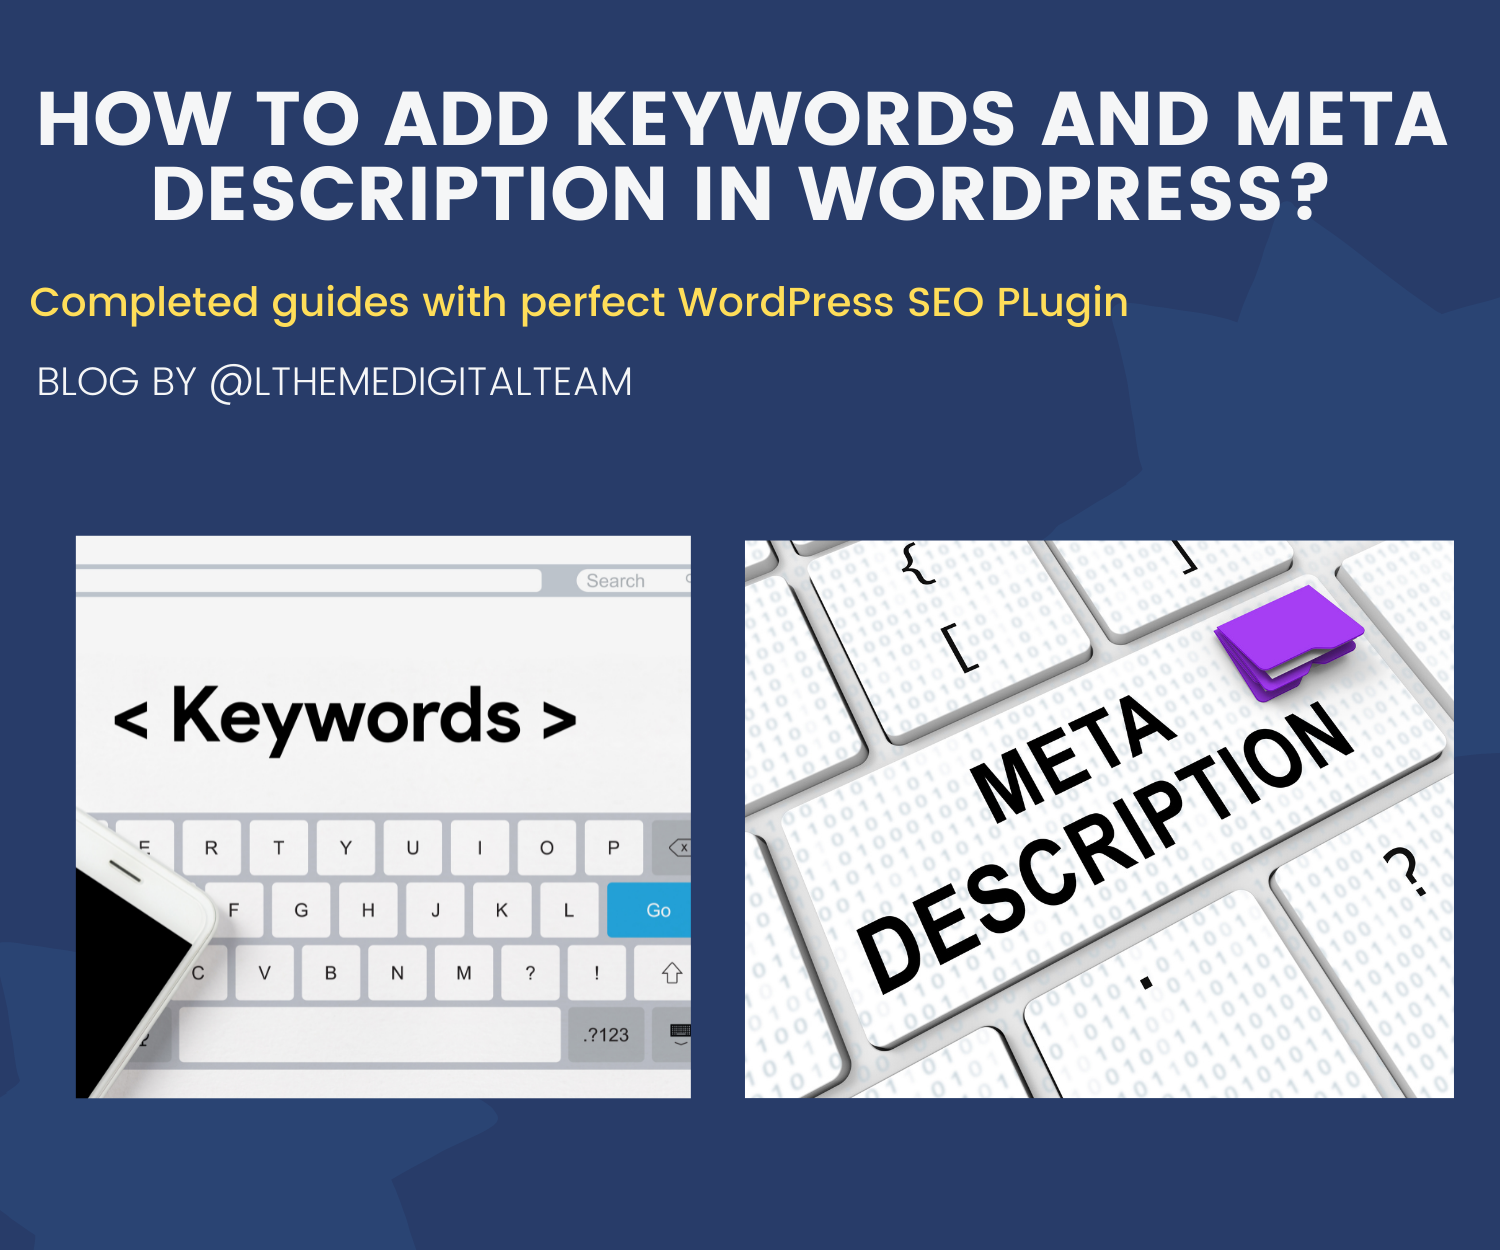 How to add keywords and meta descriptions in WordPress?